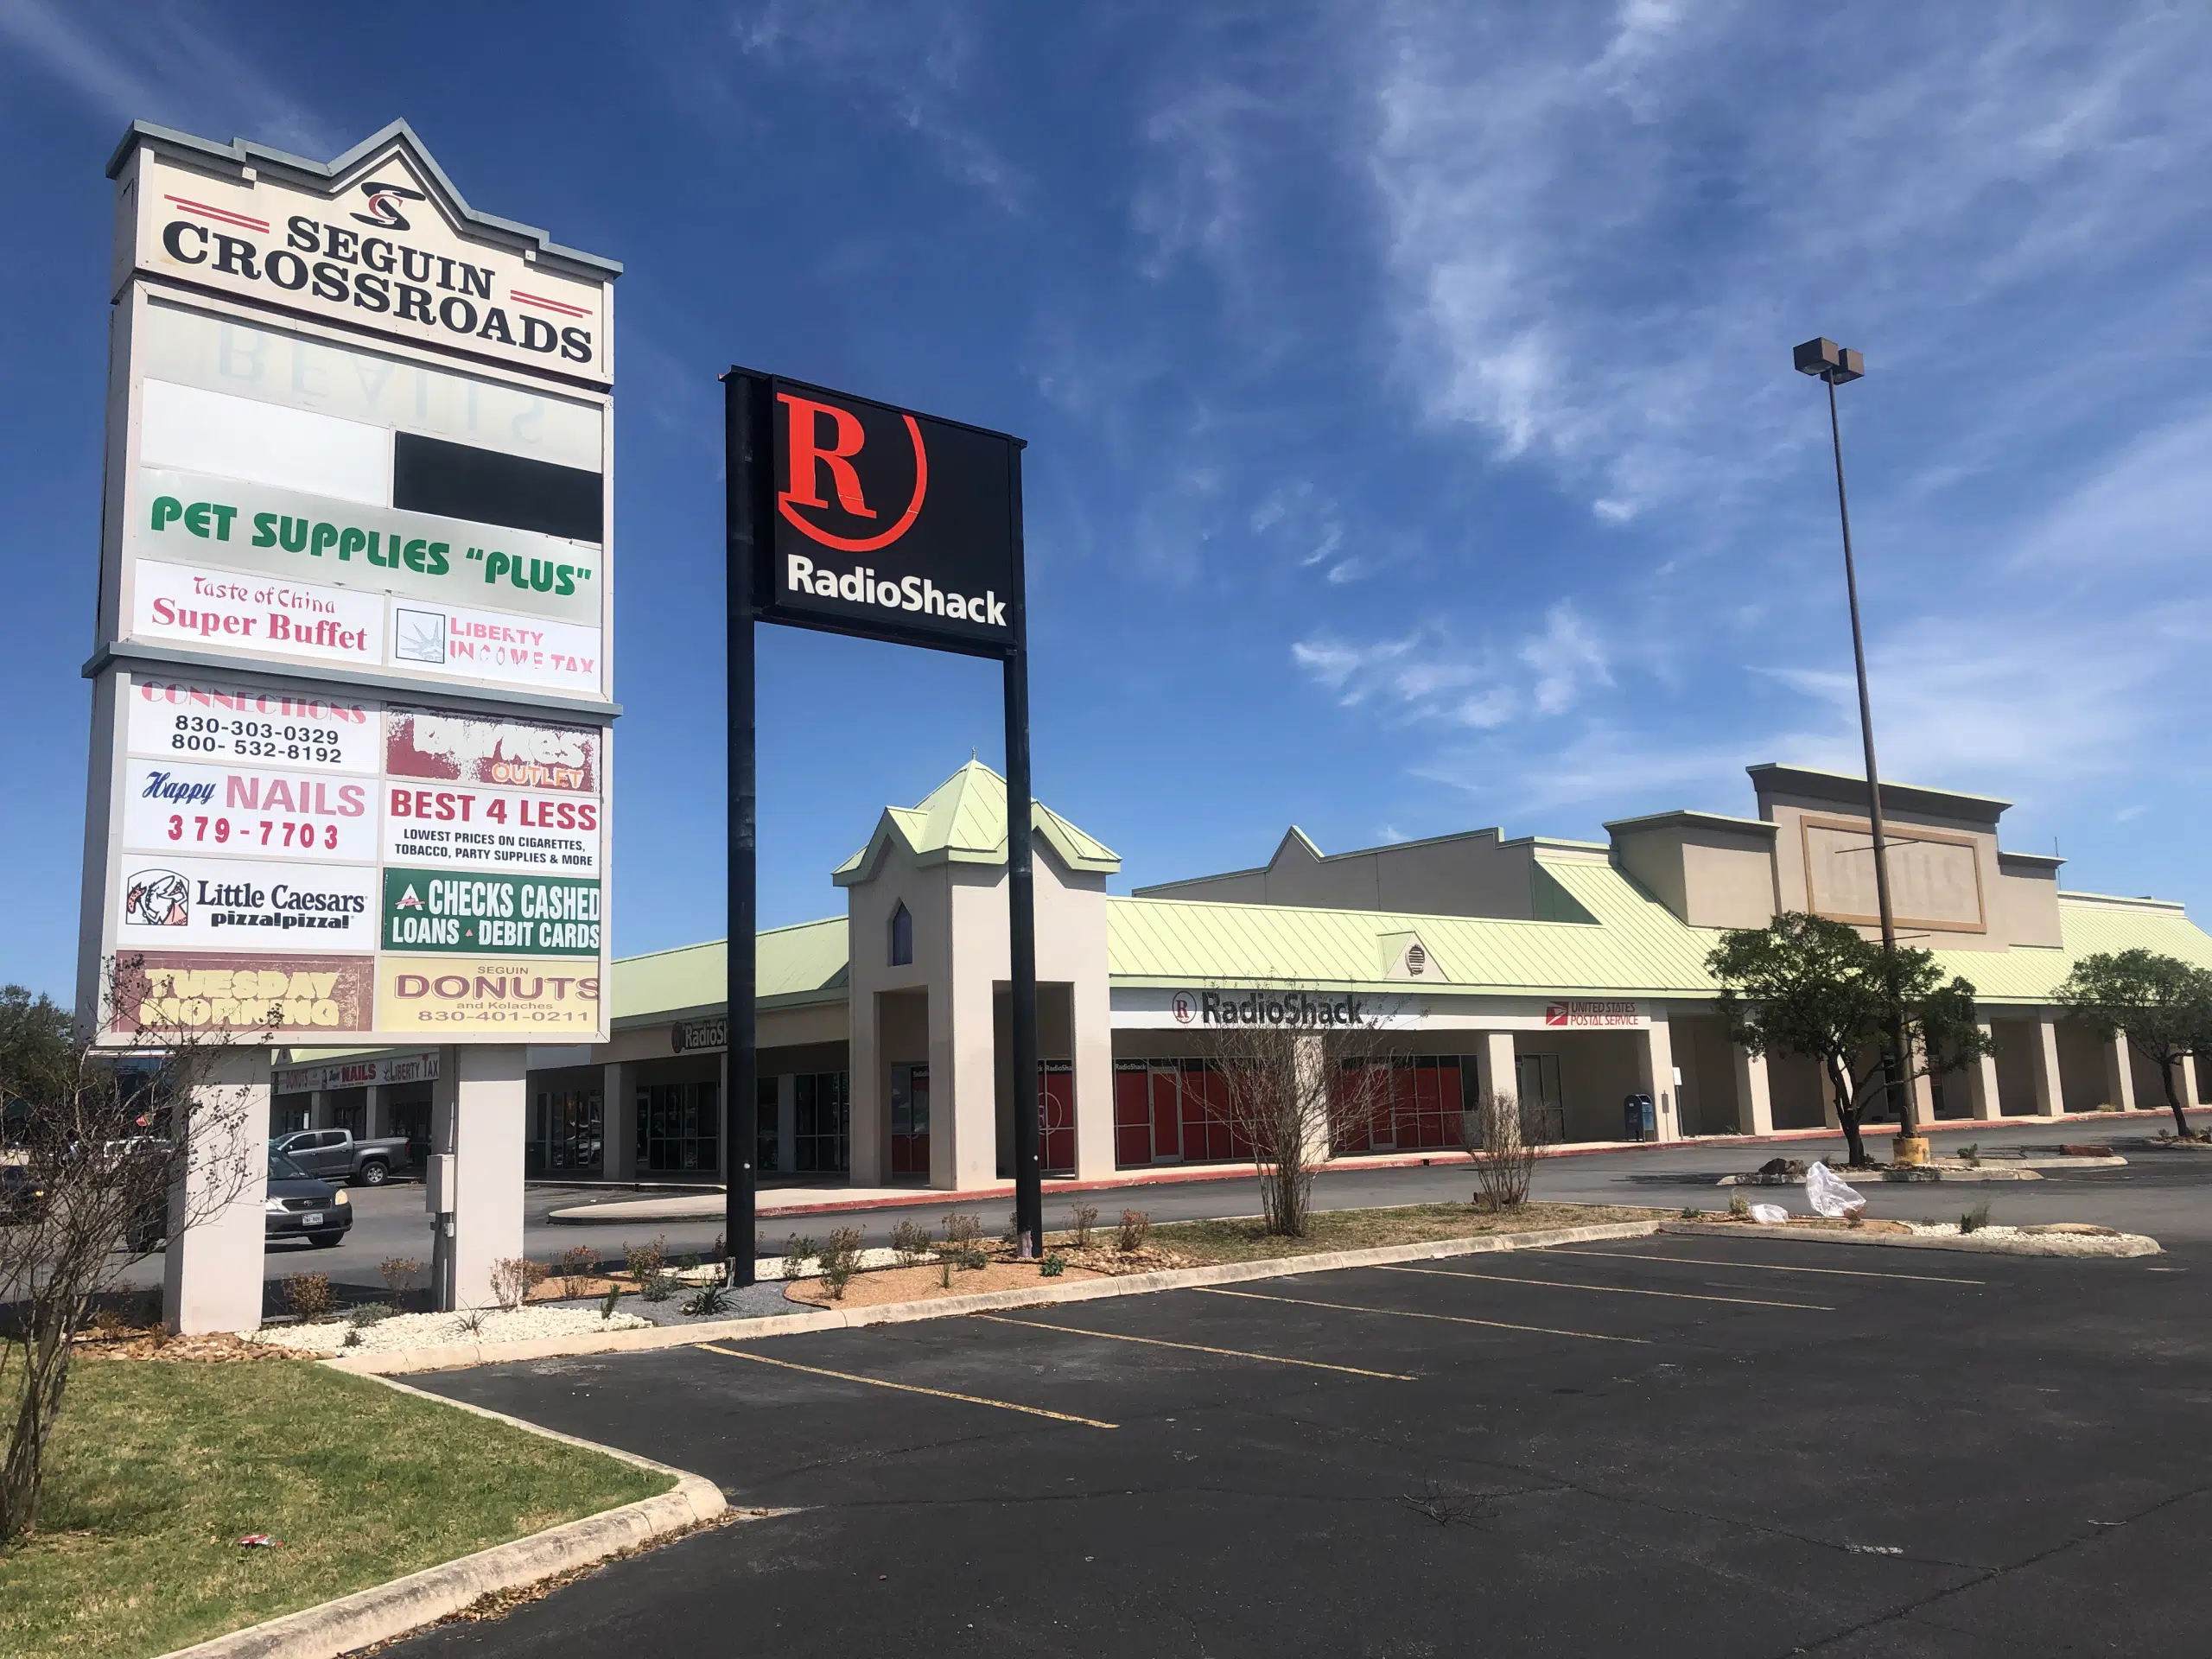 Shopping center now sold, plans in the works for a retail future